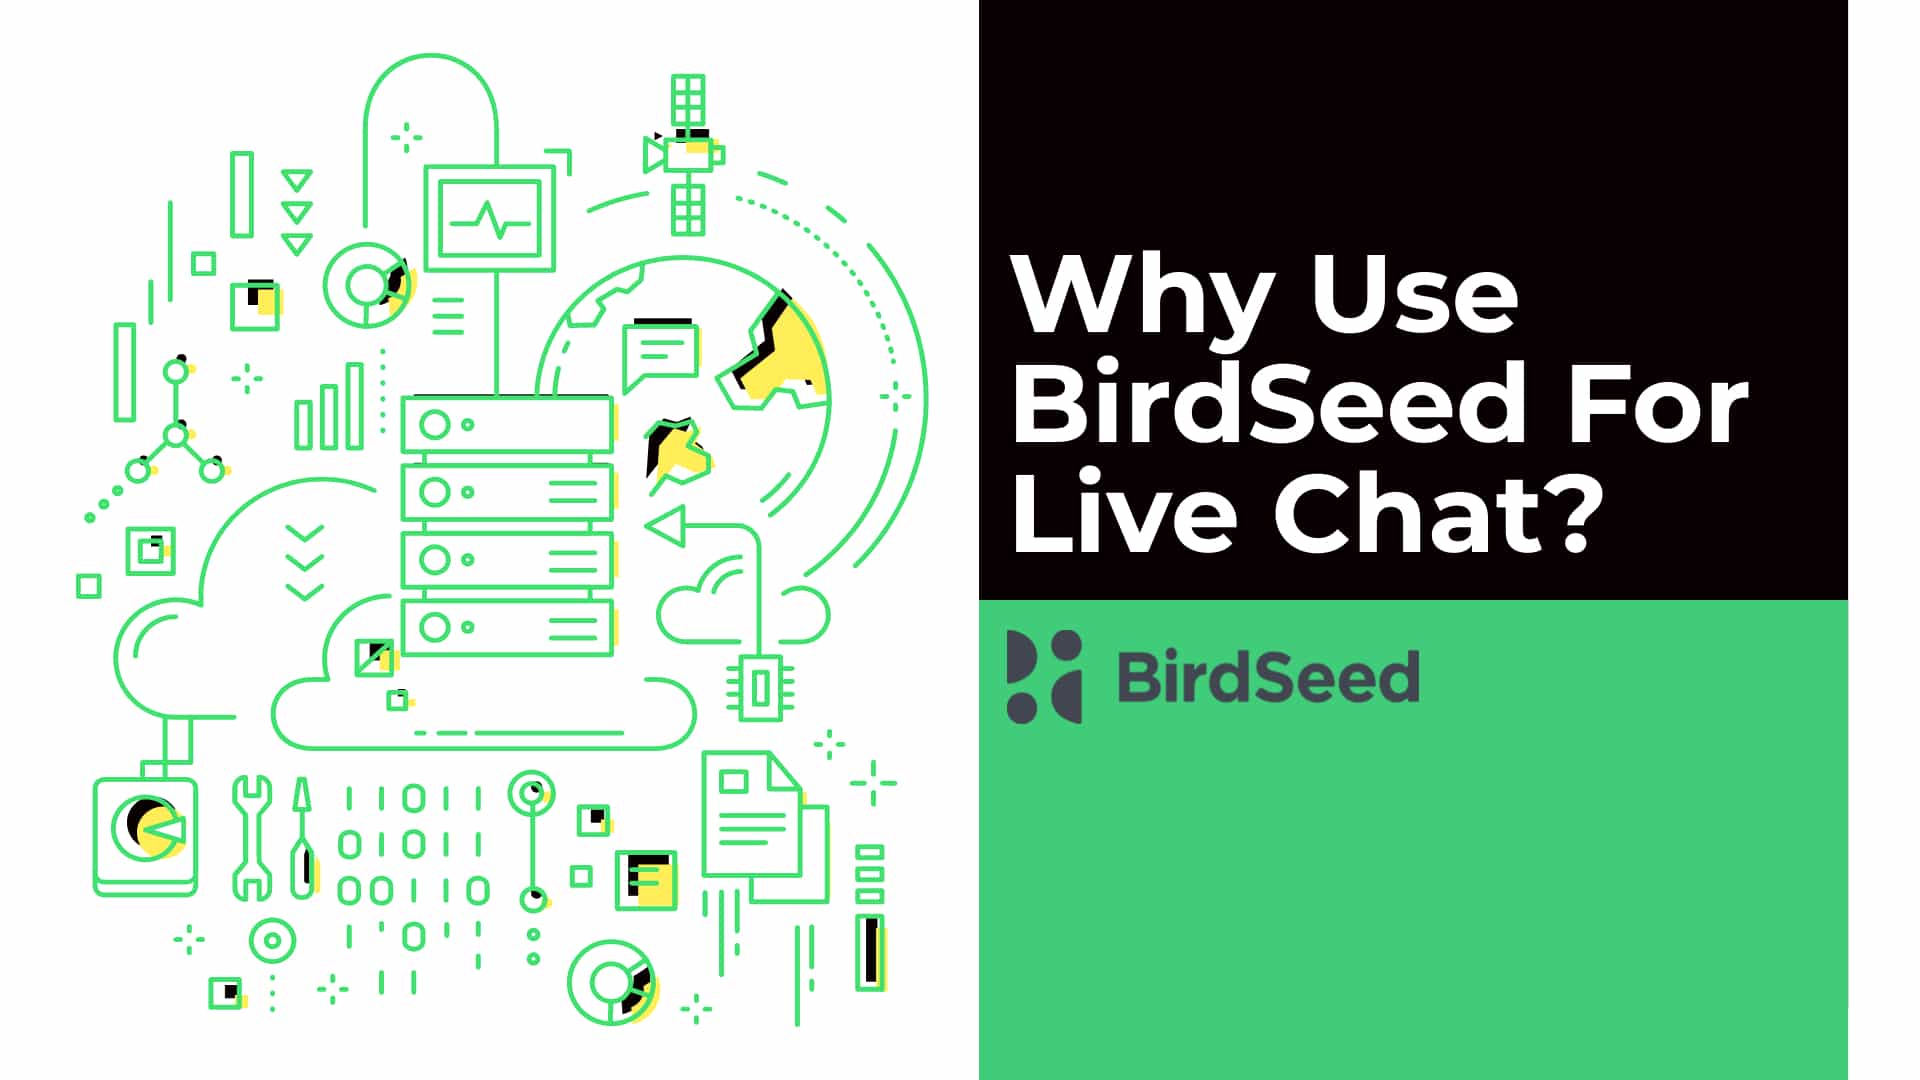 Why Use BirdSeed For Live Chat